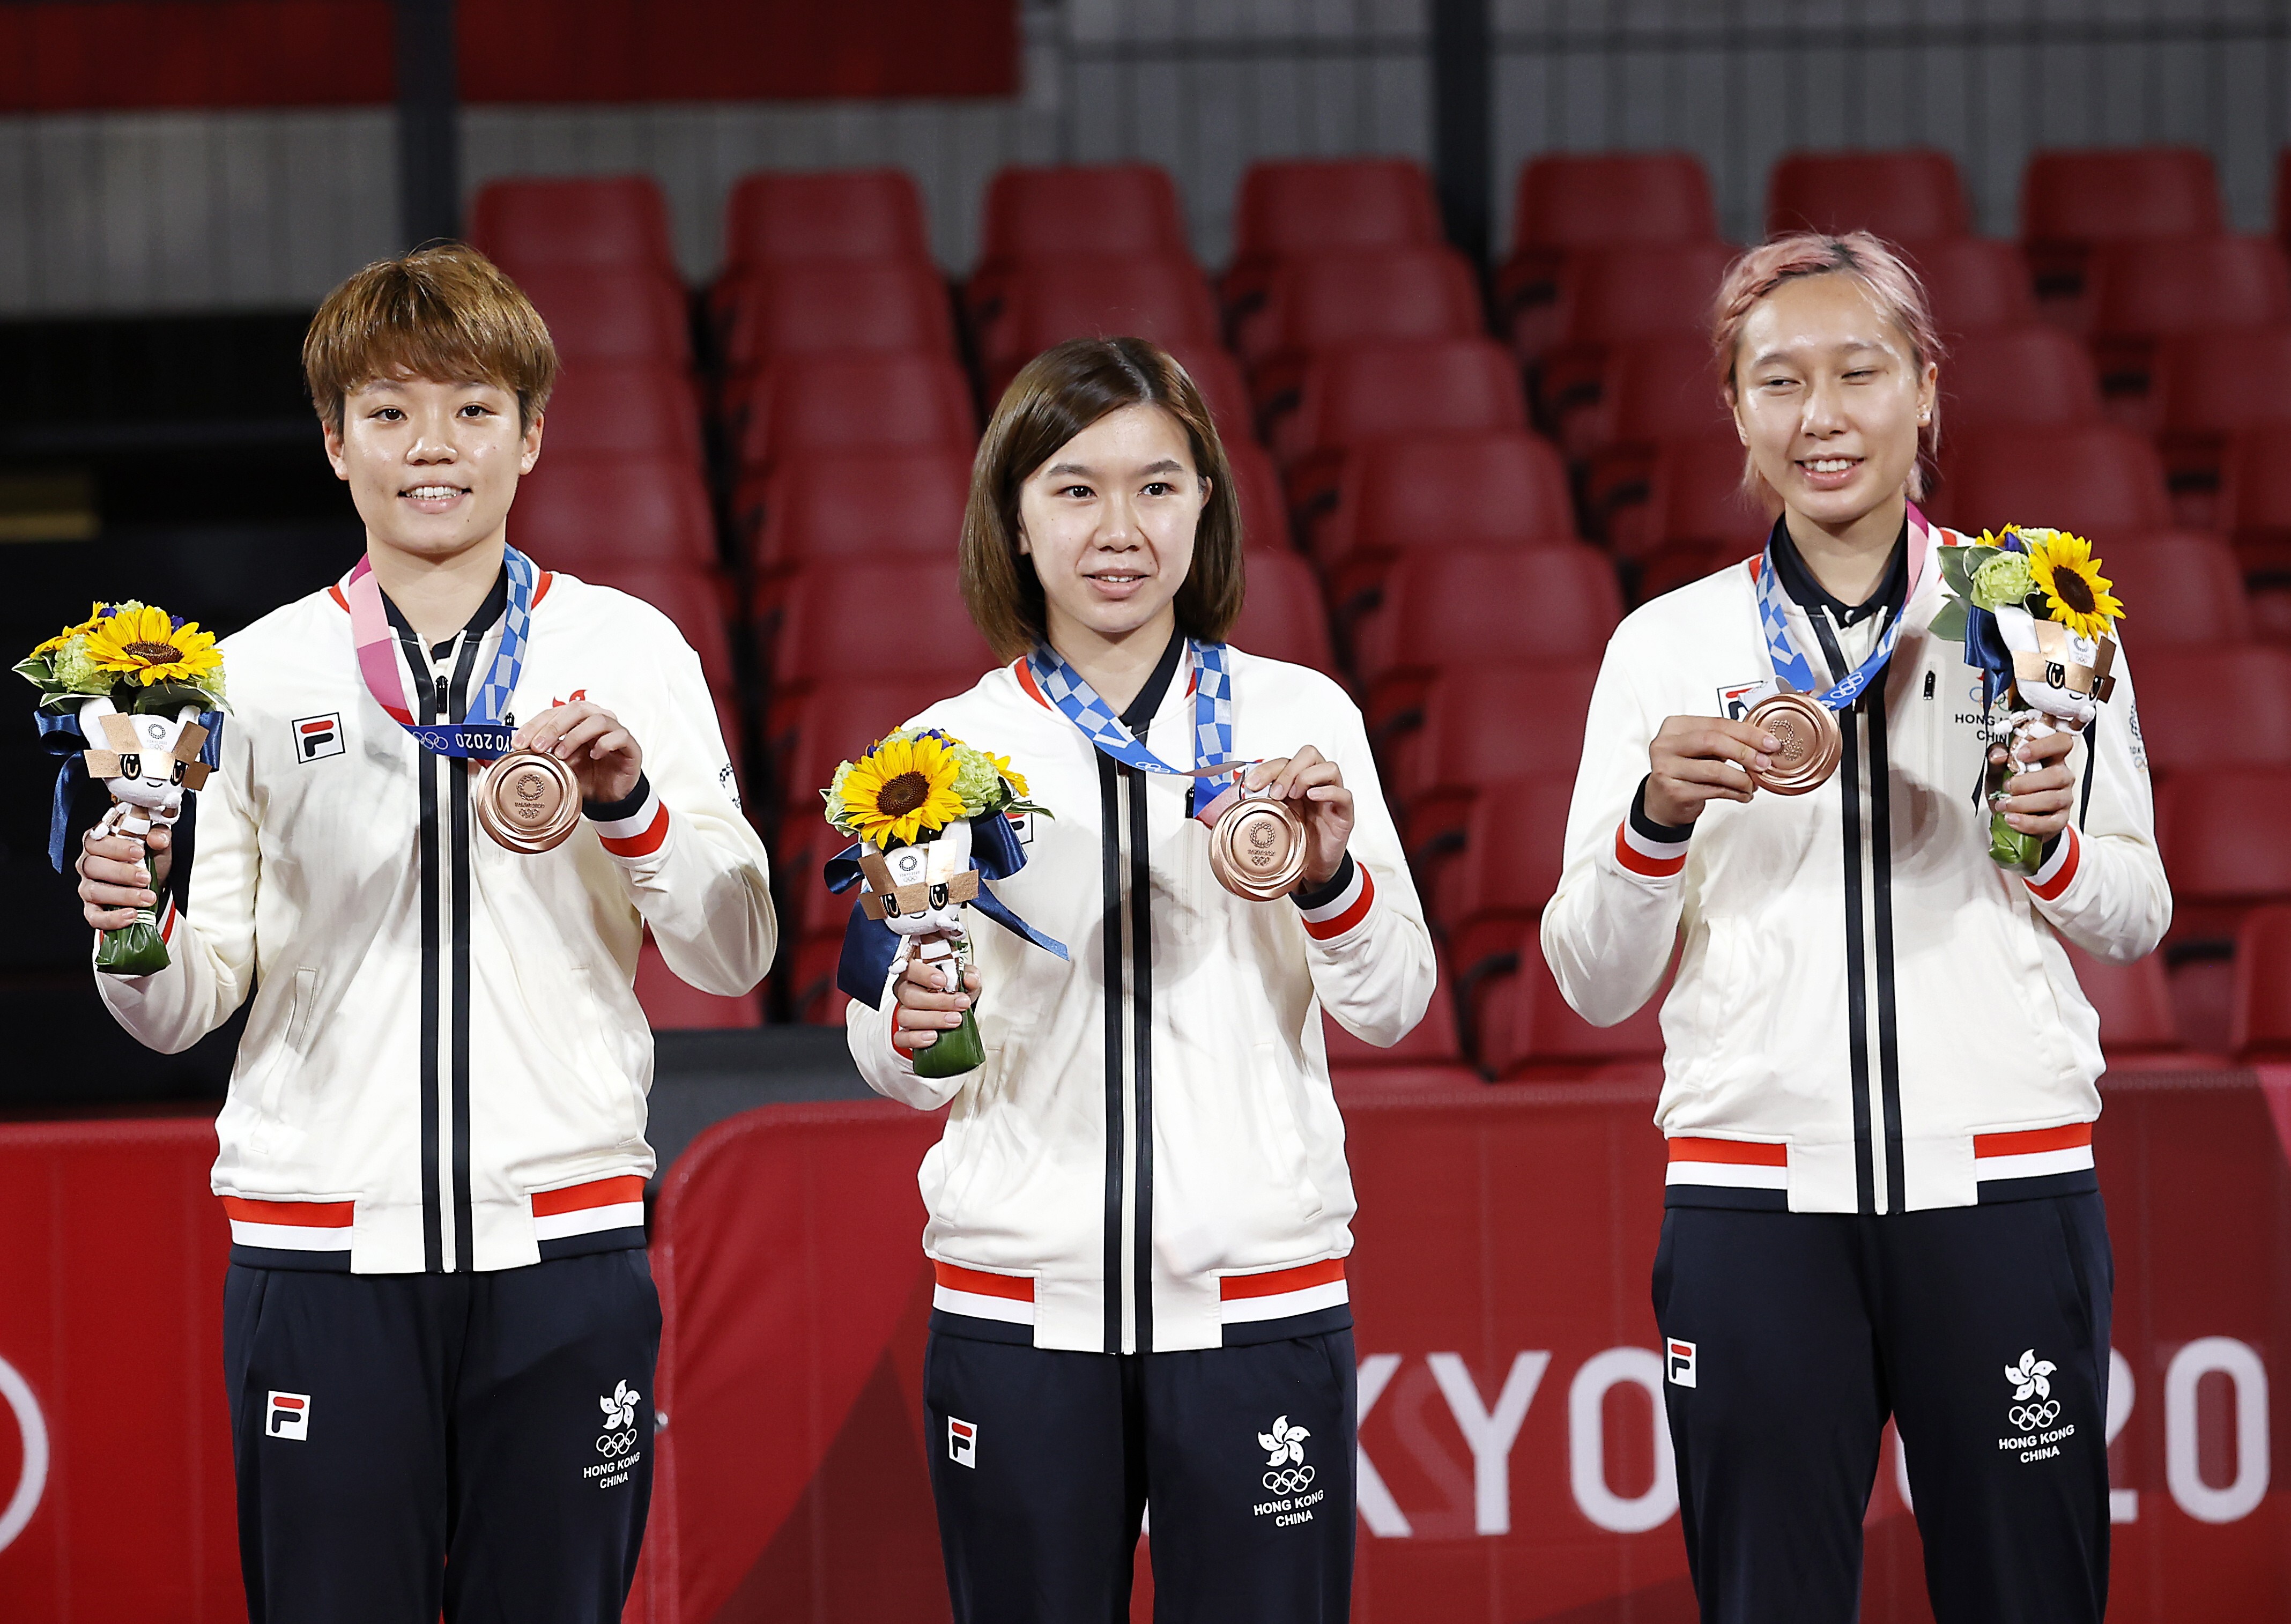 Bronze medallists Doo Hoi-kem (from left), Lee Ho-ching and Minnie Soo brought home Hong Kong’s fourth medal of the Tokyo Olympics. Photo: EPA-EFE